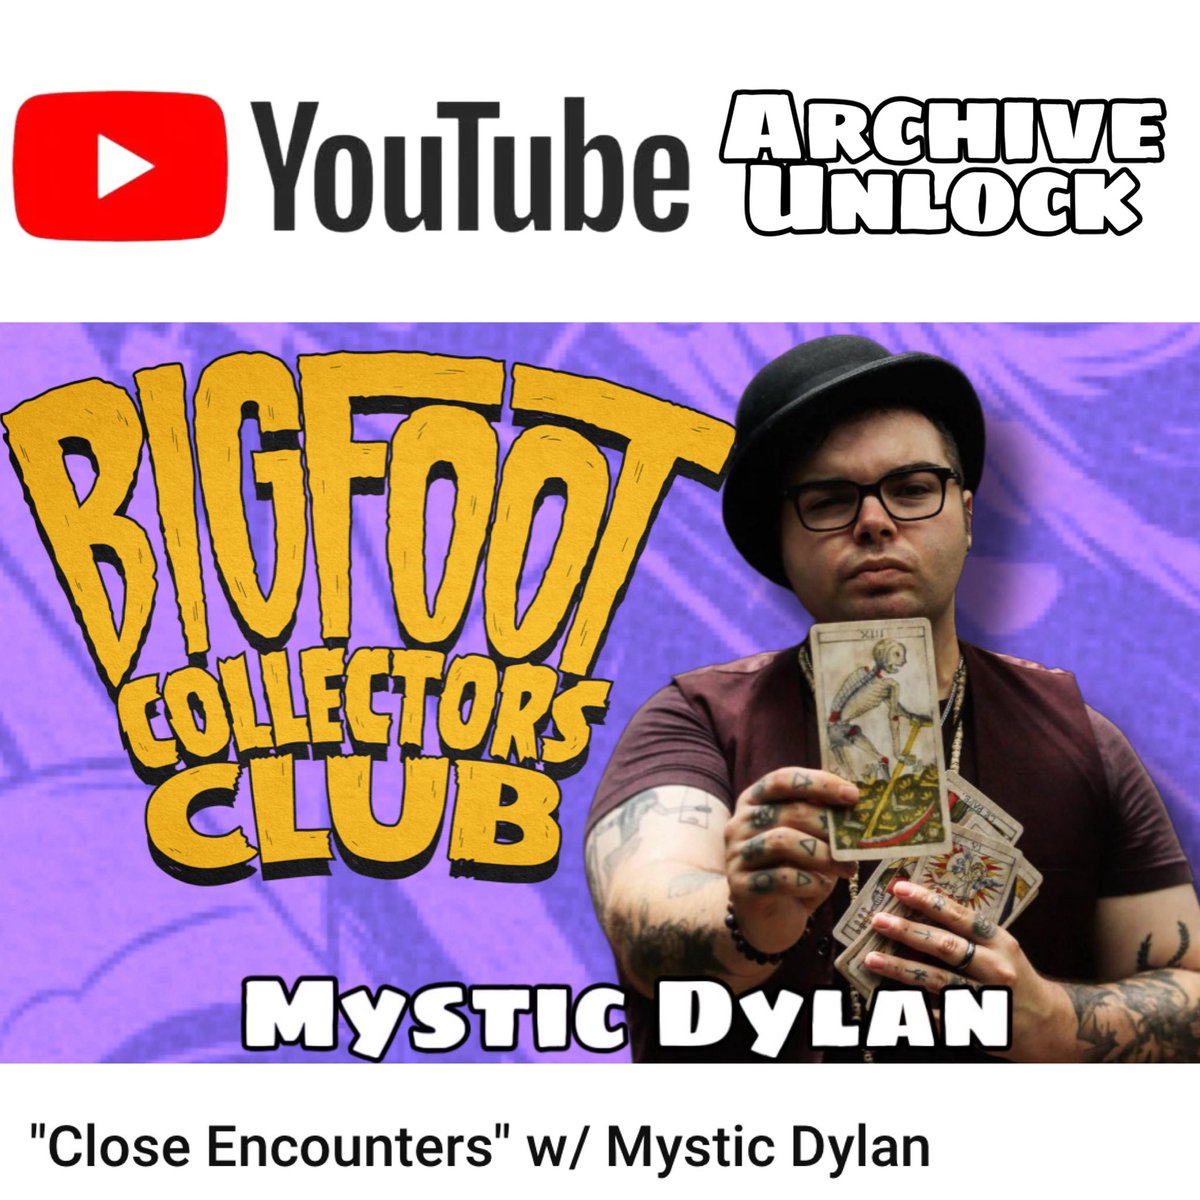 L-Files Video Ep w/ @Mystic_Dylan unlocked on our YouTube! m.youtube.com/@bigfootcollec… @BryceOJohnson